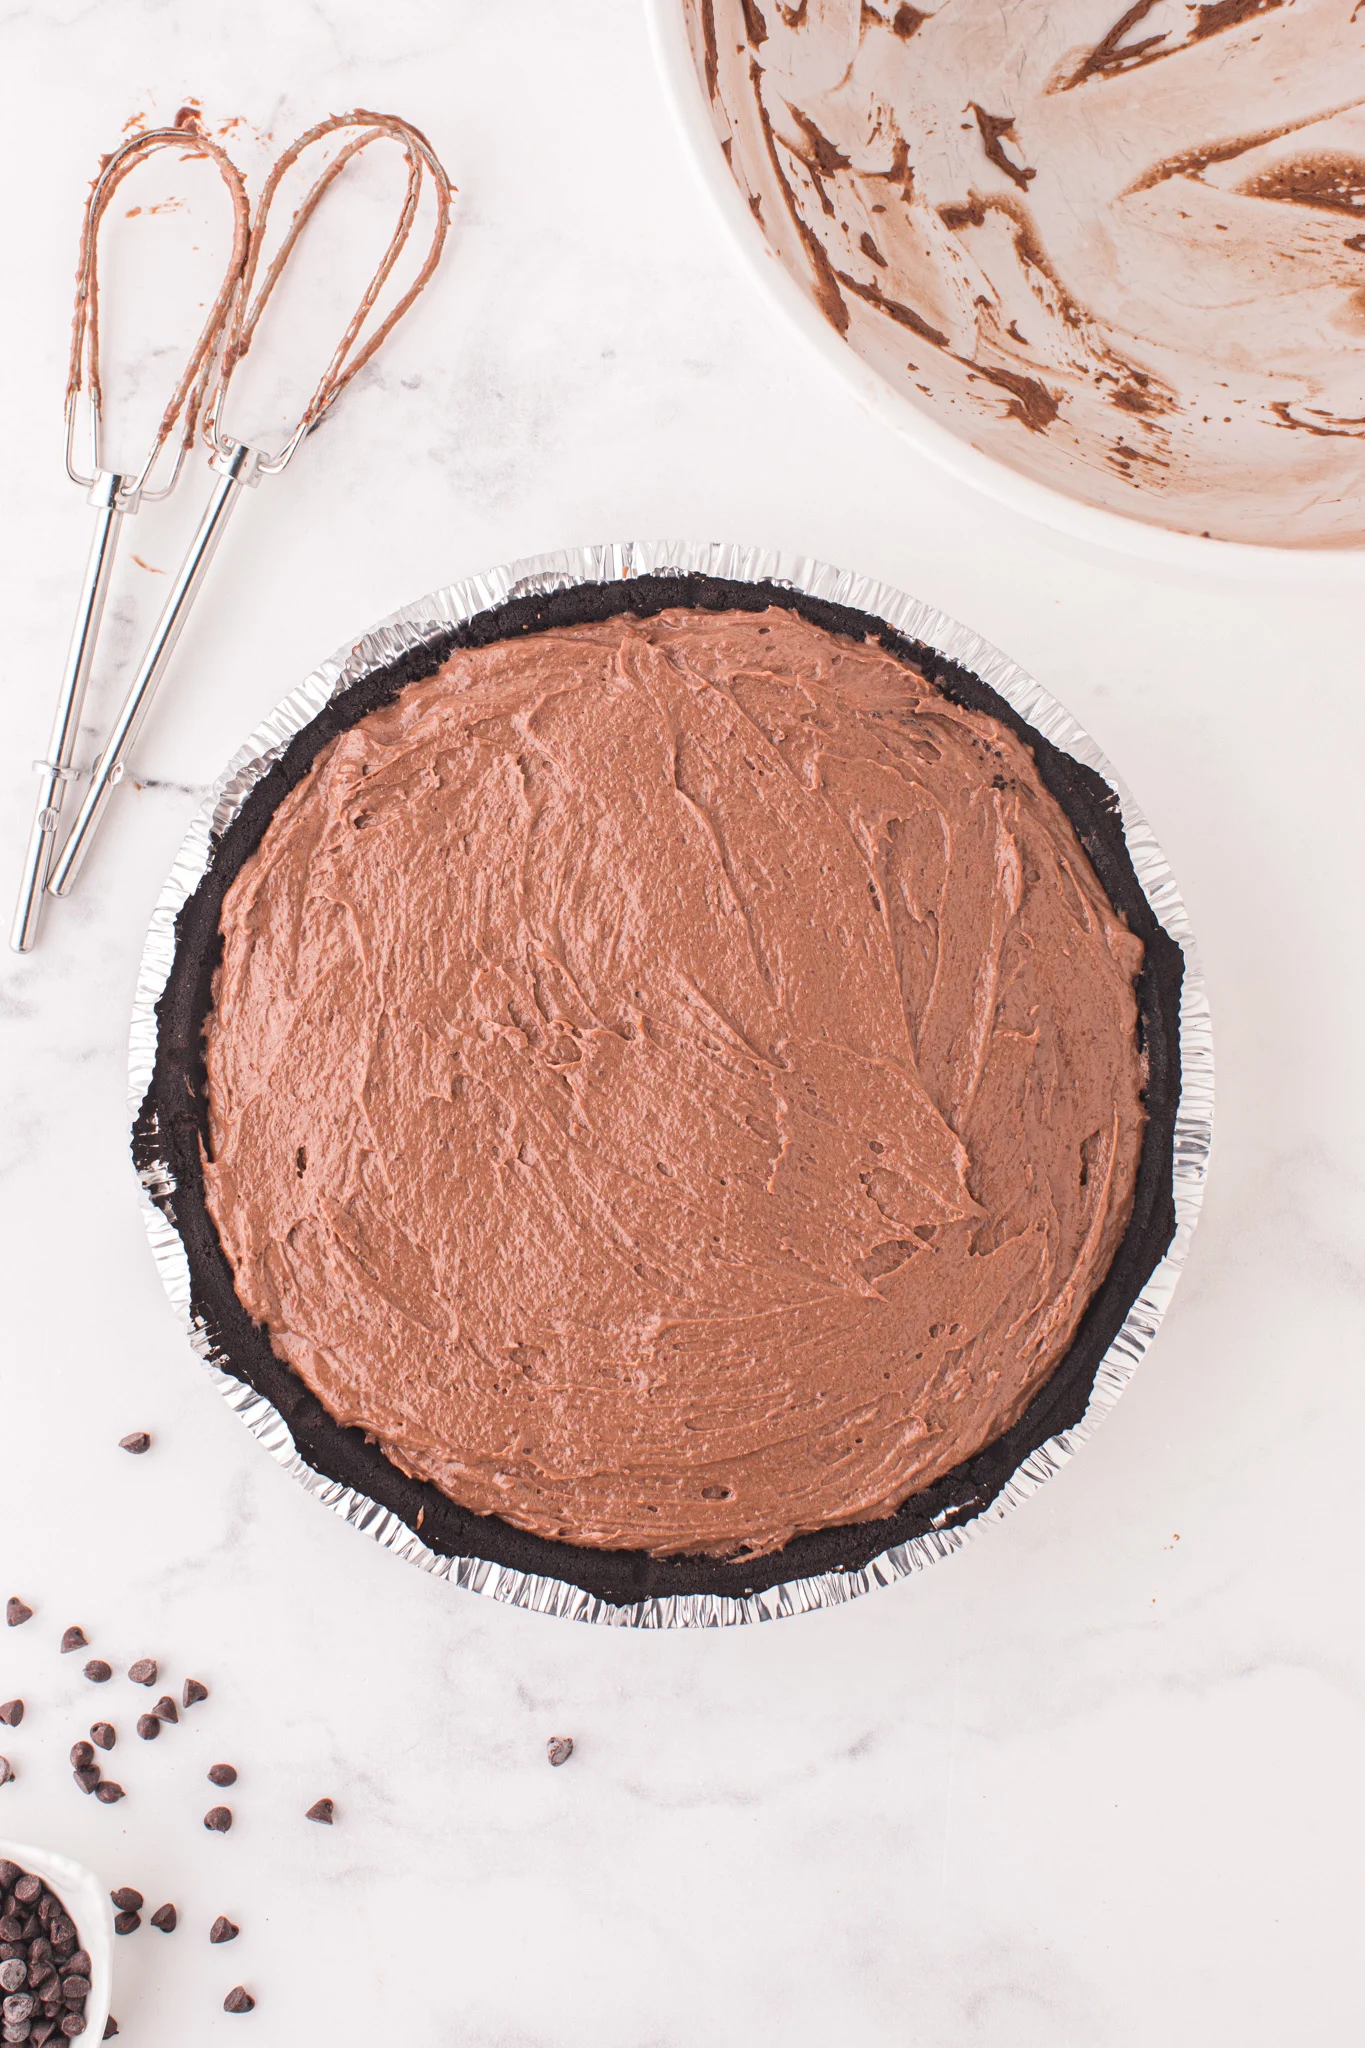 Nutella and pudding mixture in an Oreo pie crust